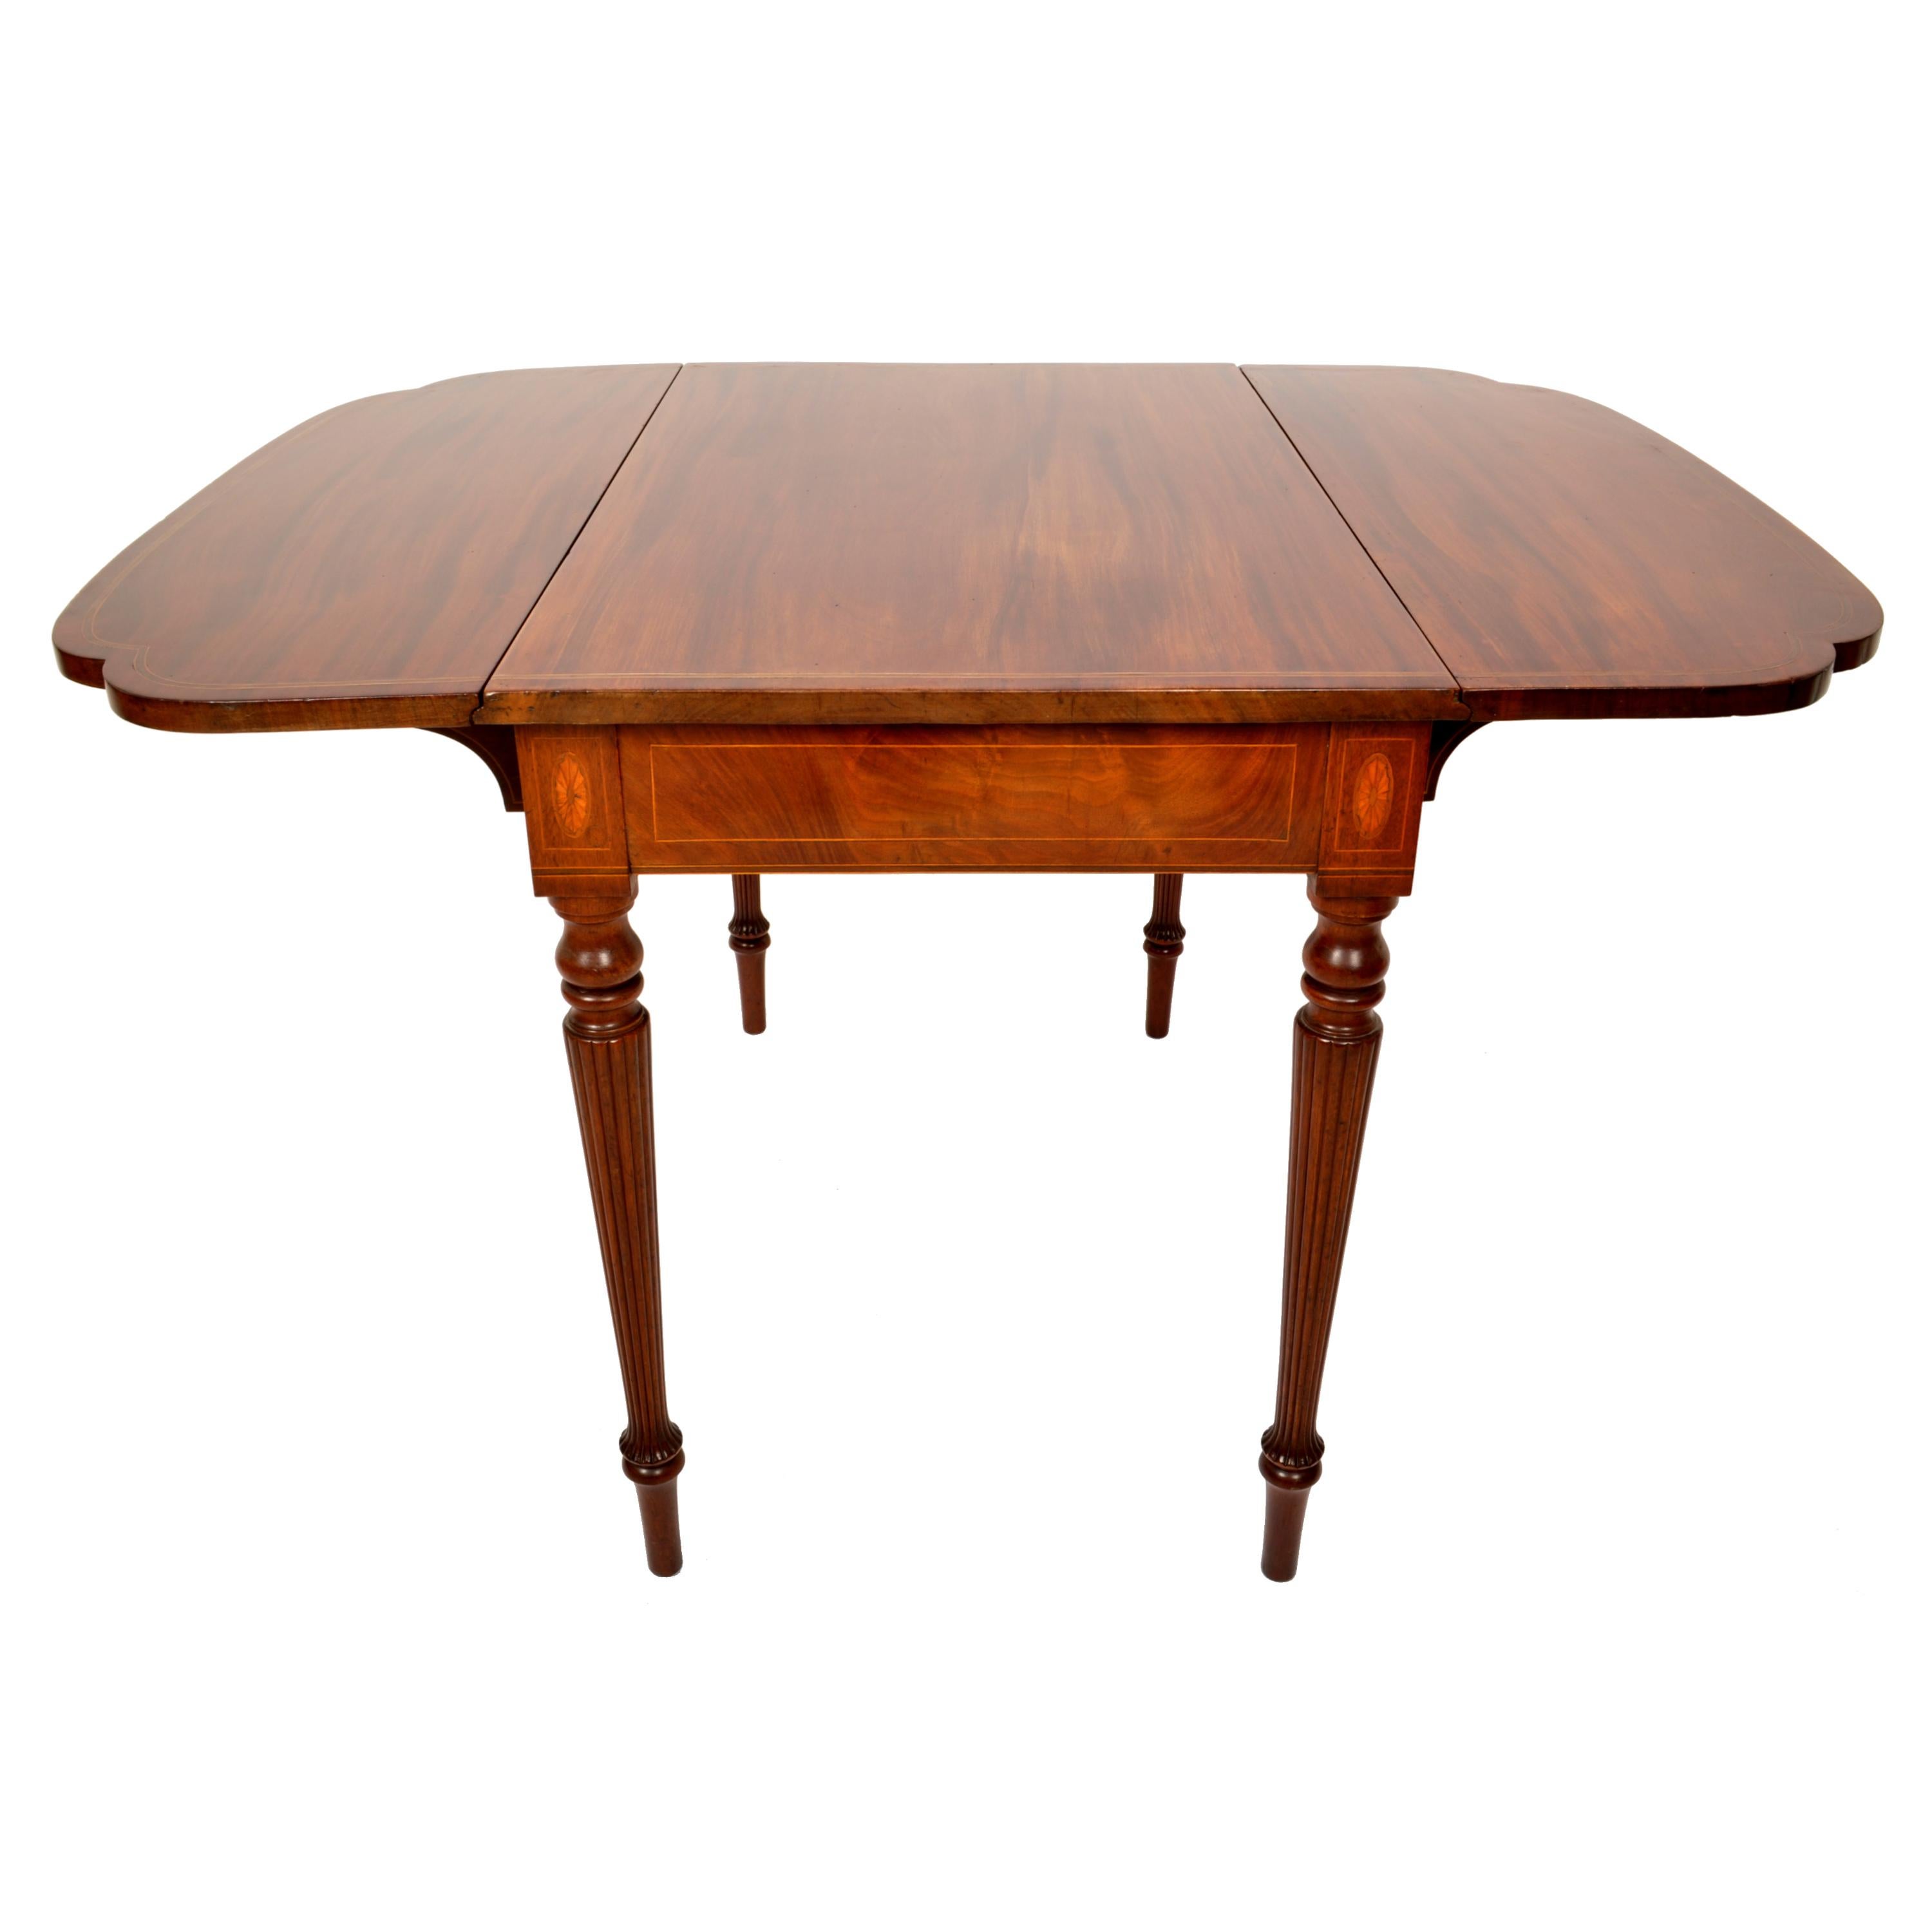 Antique American Federal Sheraton Inlaid Mahogany Pembroke Table New York 1790 For Sale 4